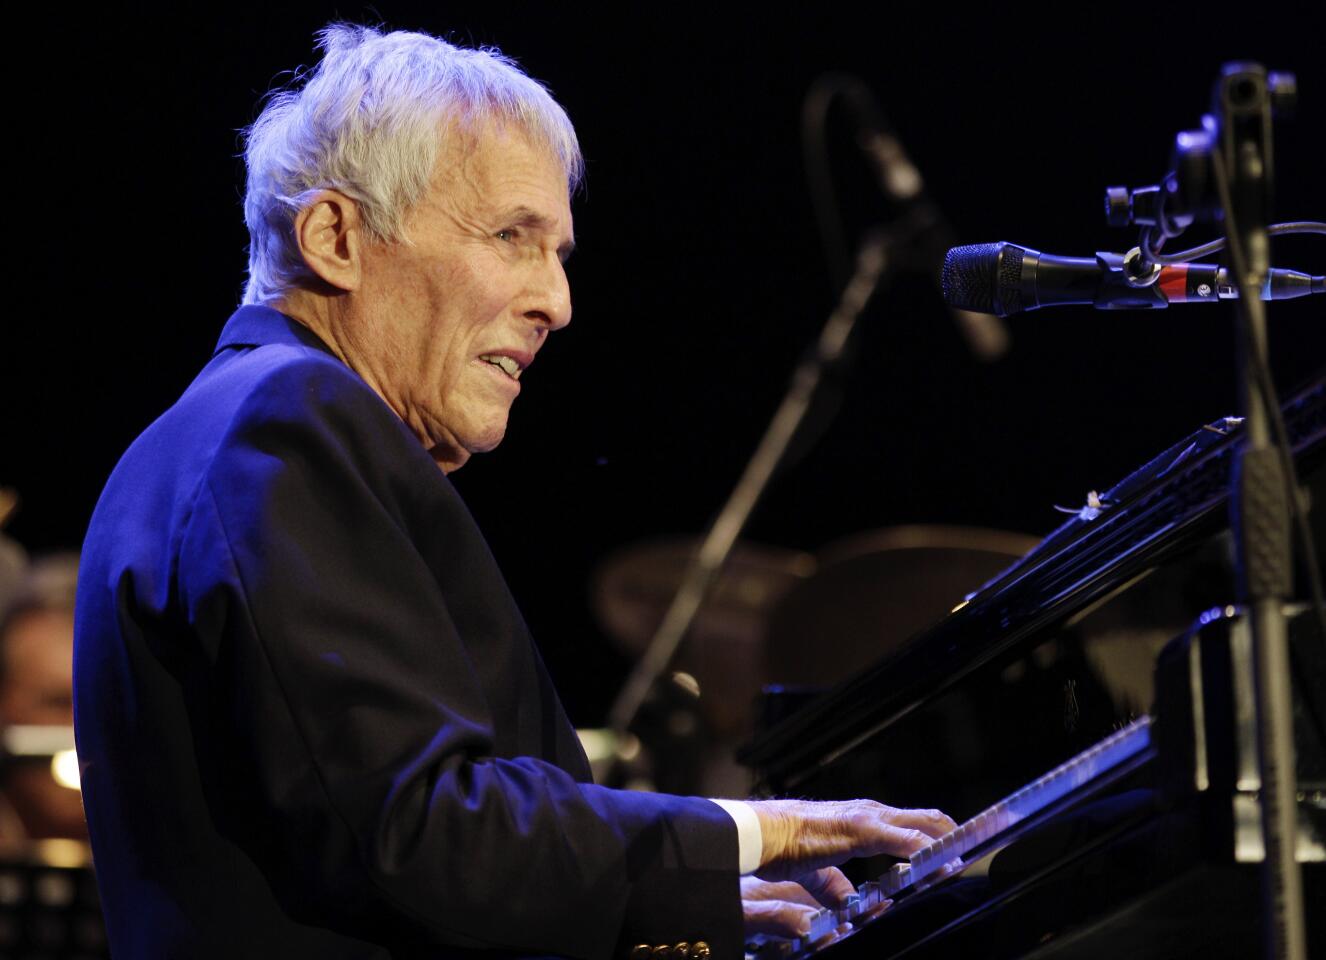 Burt Bacharach onstage playing the piano